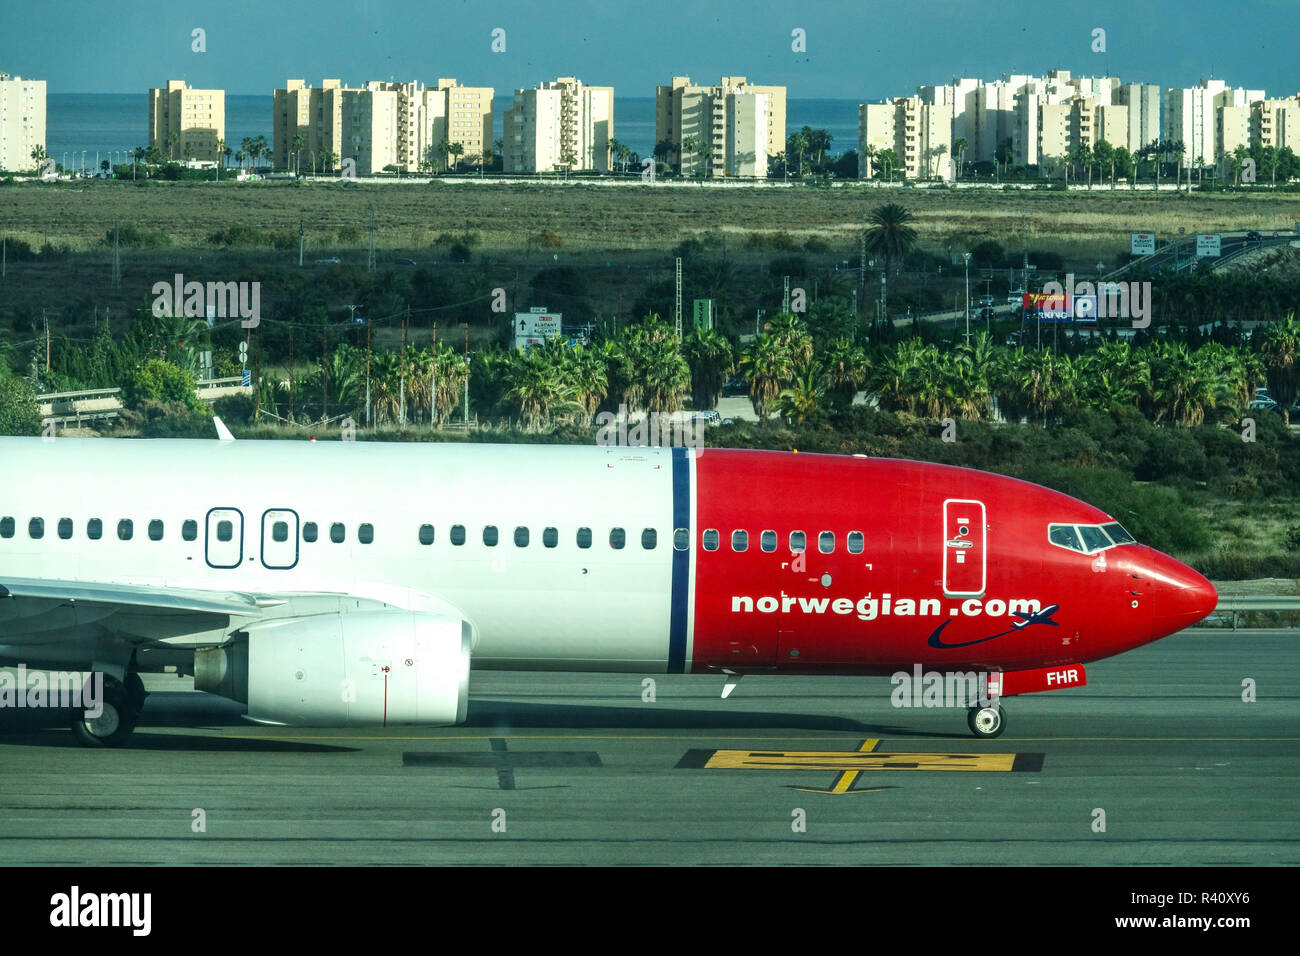 Alicante Airport, Boeing aircraft, Norwegian Airlines plane on tarmac and buildings at seaside Stock Photo